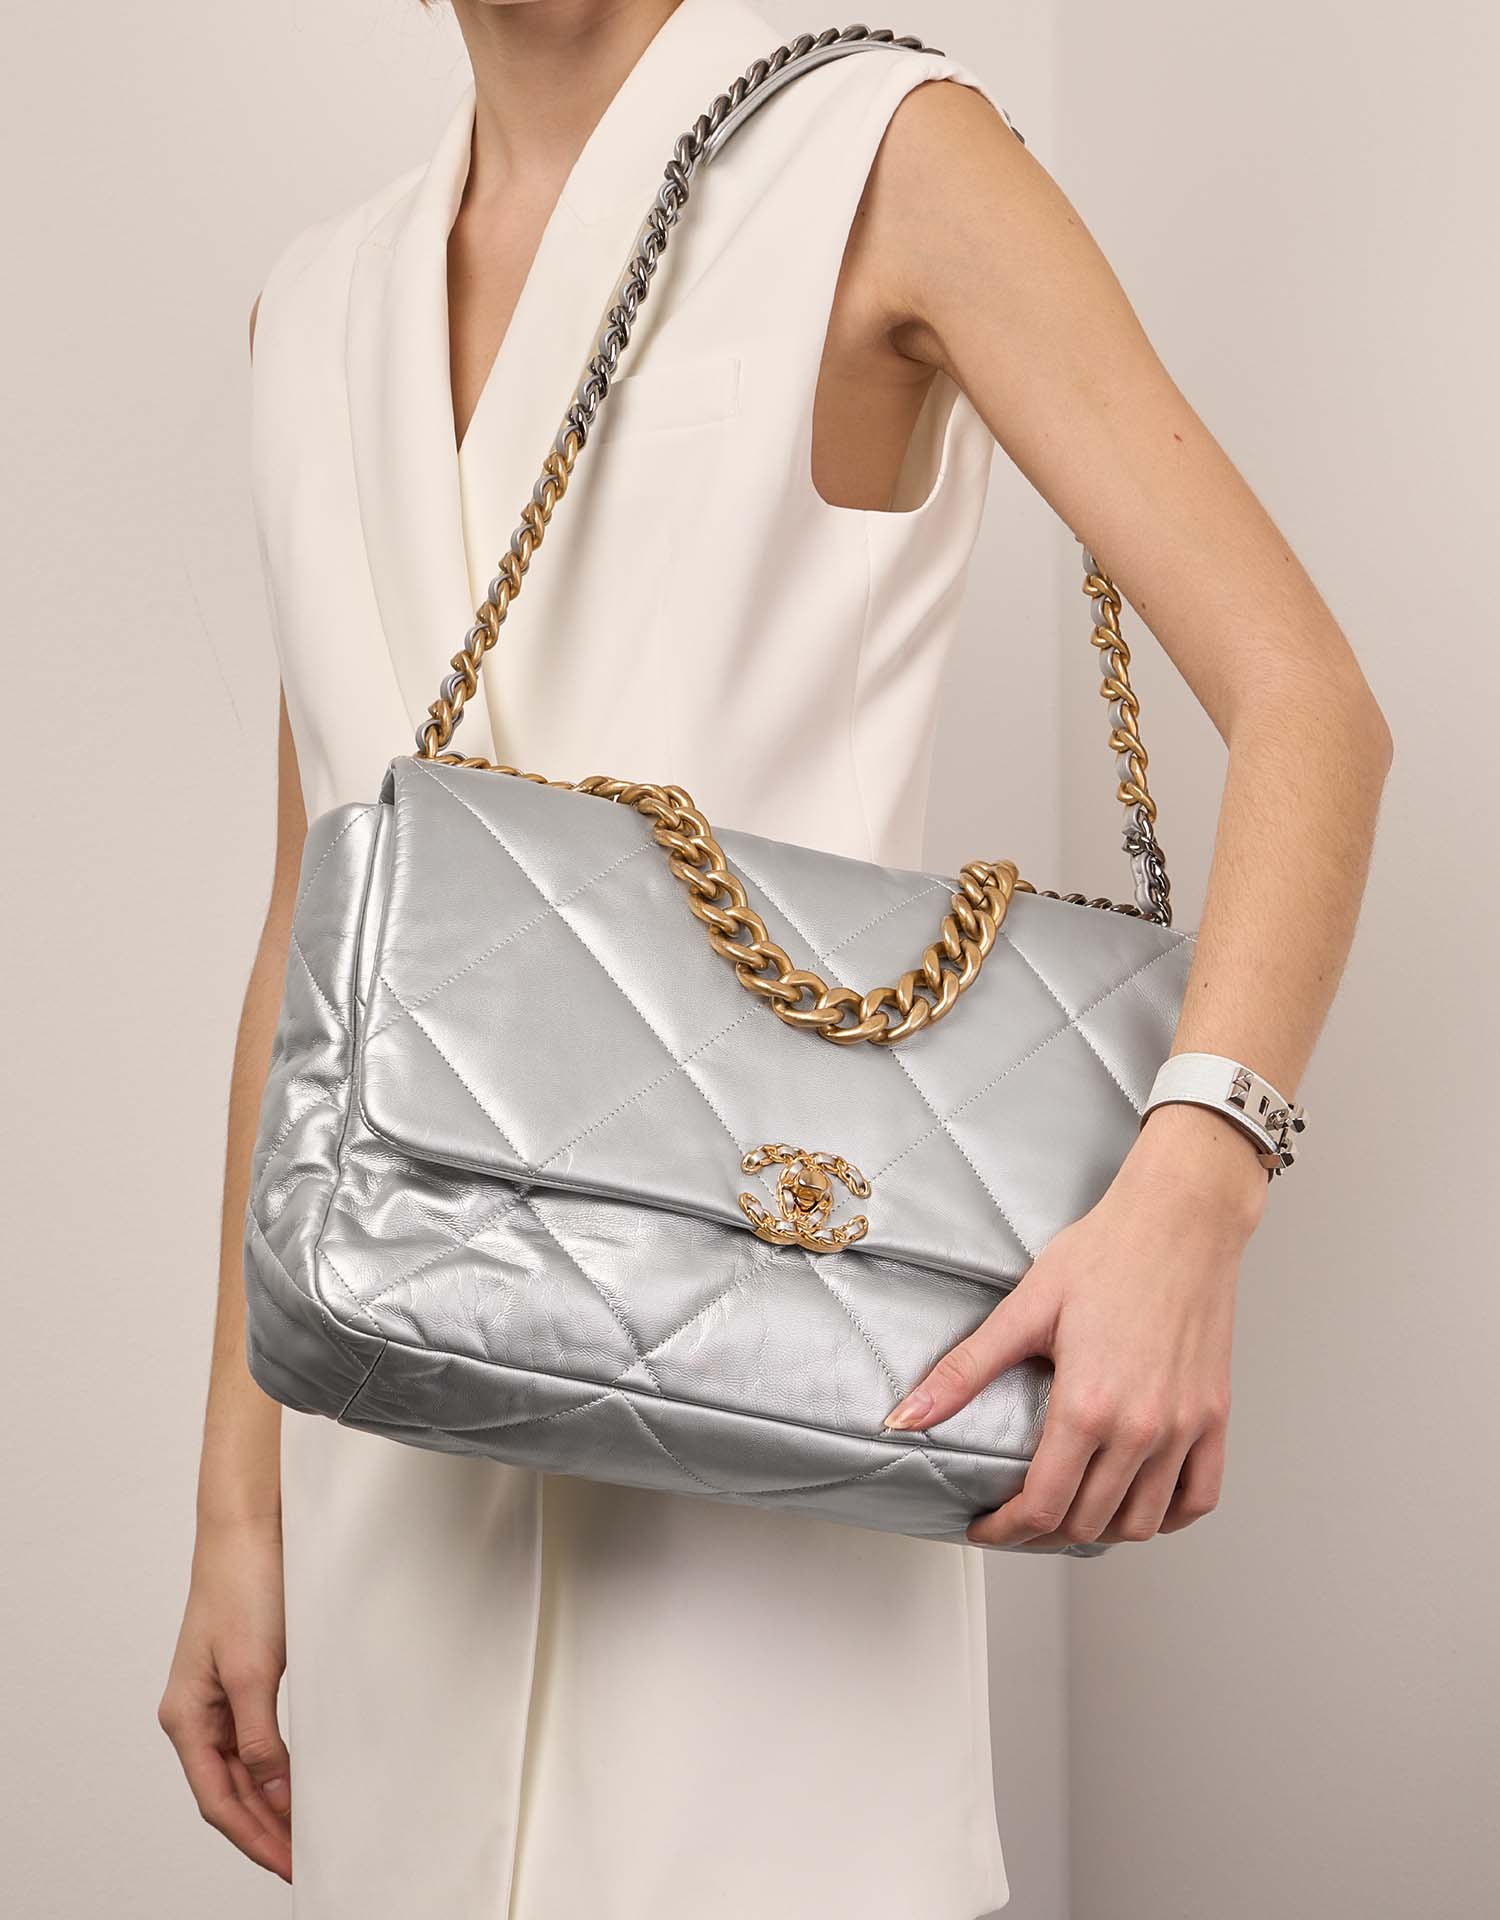 Chanel 19 Maxi Silver Sizes Worn | Sell your designer bag on Saclab.com